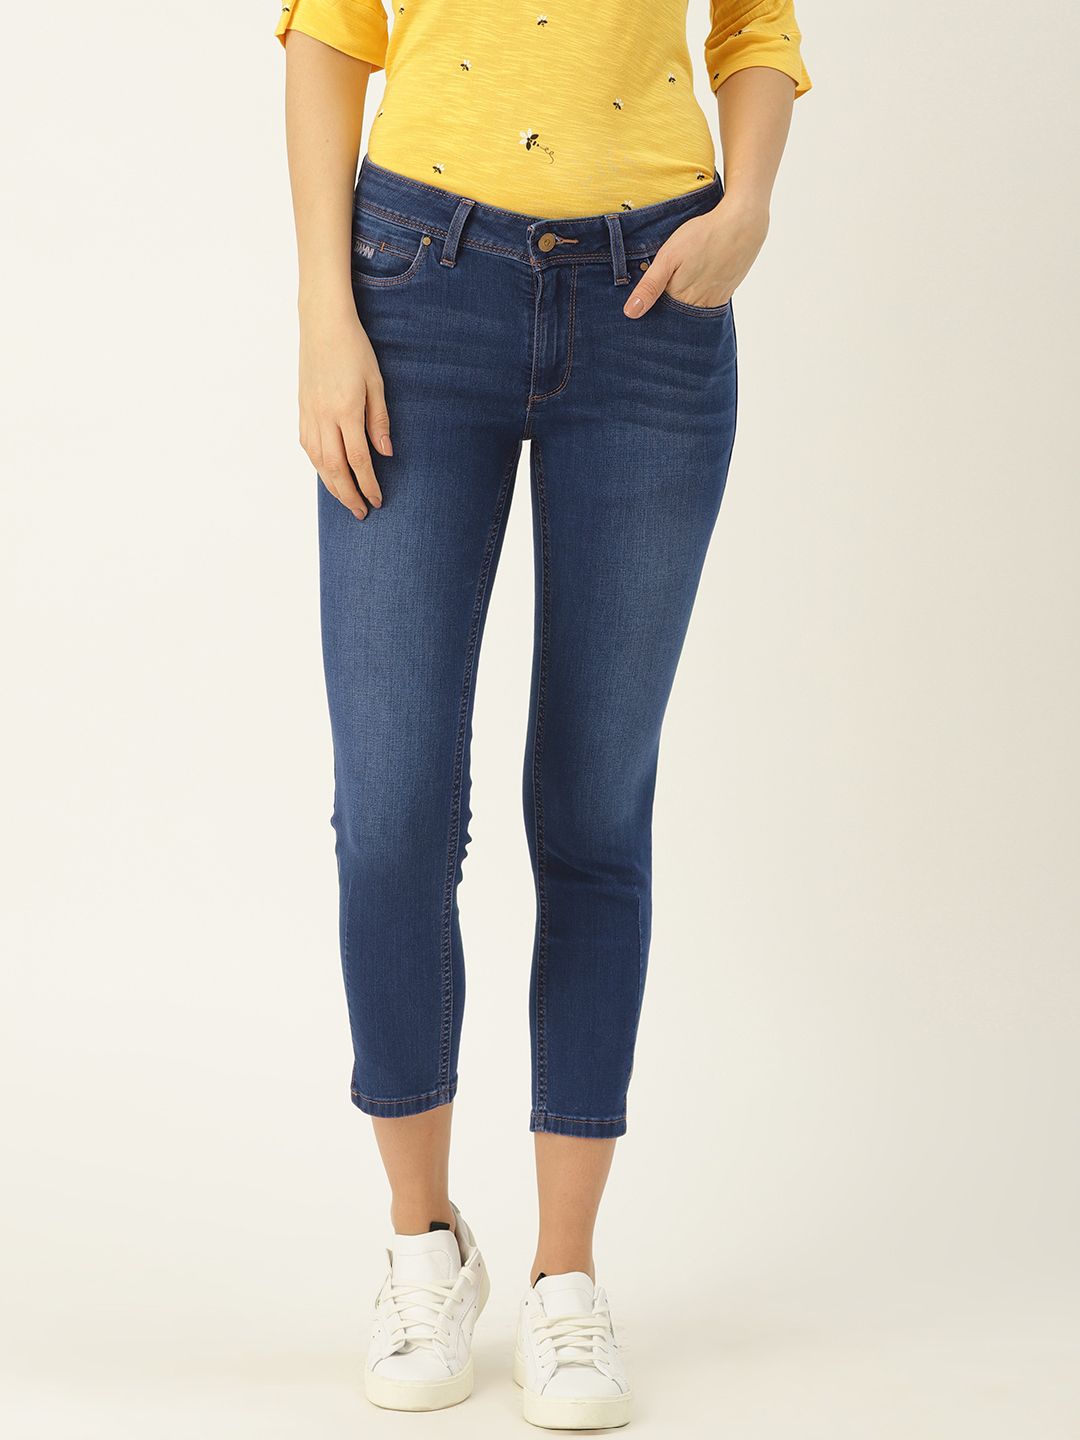 Allen Solly Woman Blue Slim Fit Mid-Rise Clean Look Stretchable Cropped Jeans